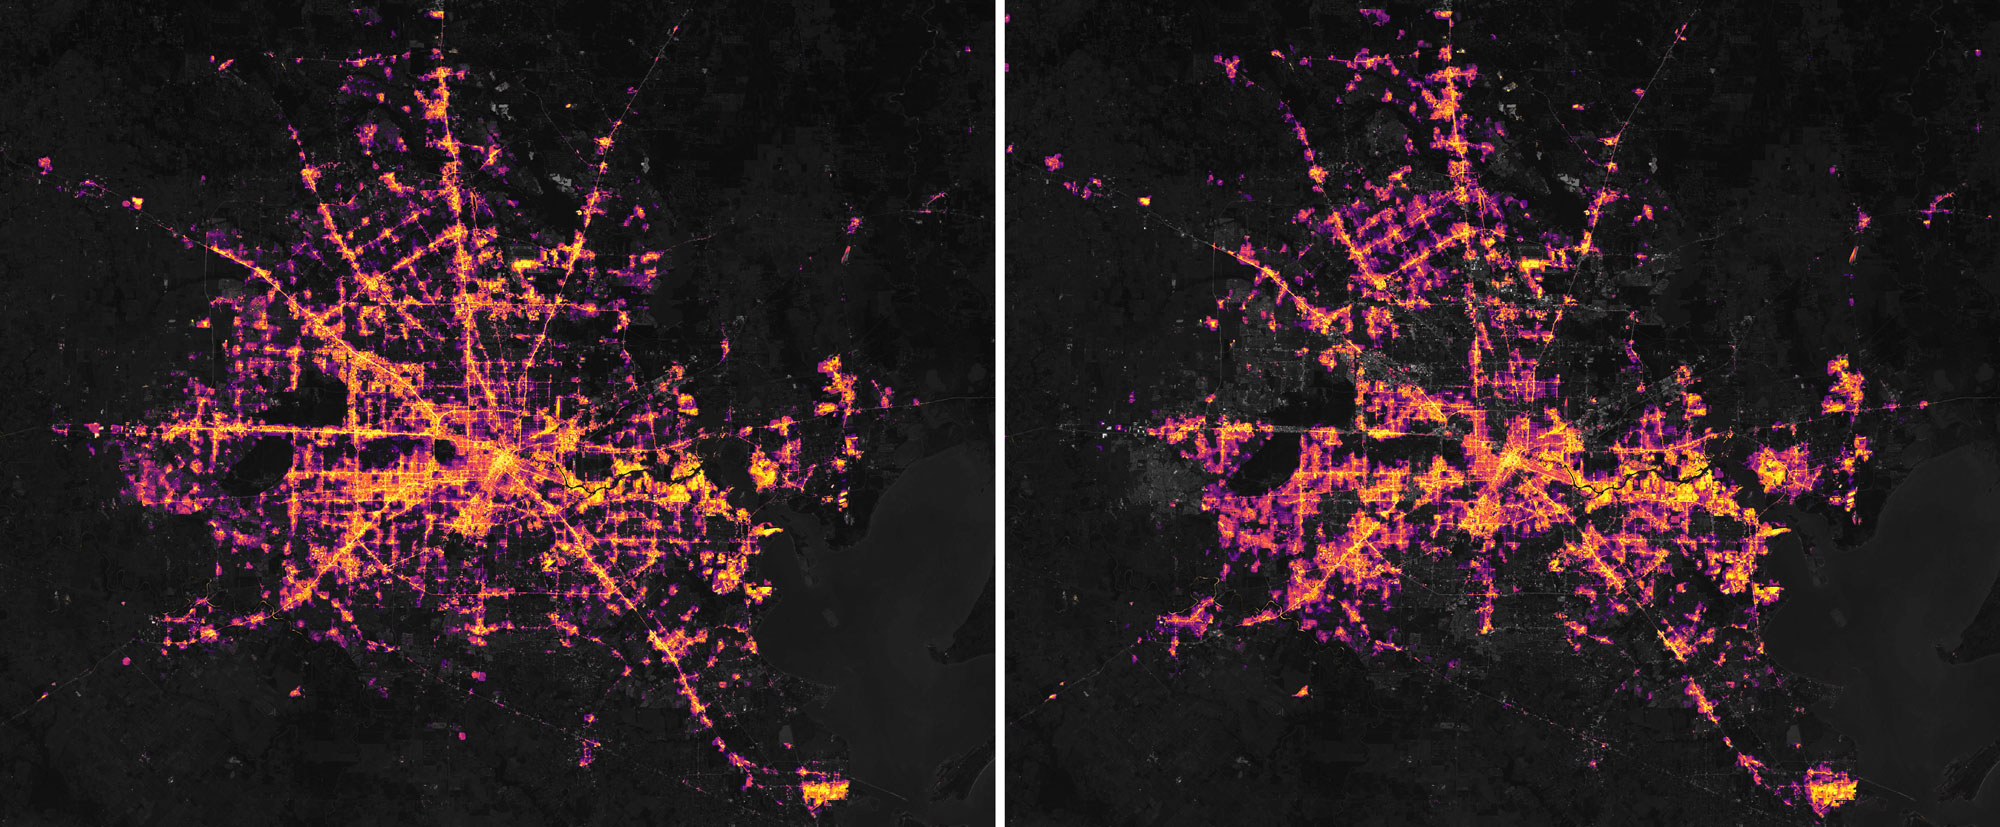 Side-by-side satellite images of Houston showing lights at night before and after severe winter weather in 2021. The city is more illuminated before the storm than after the storm.